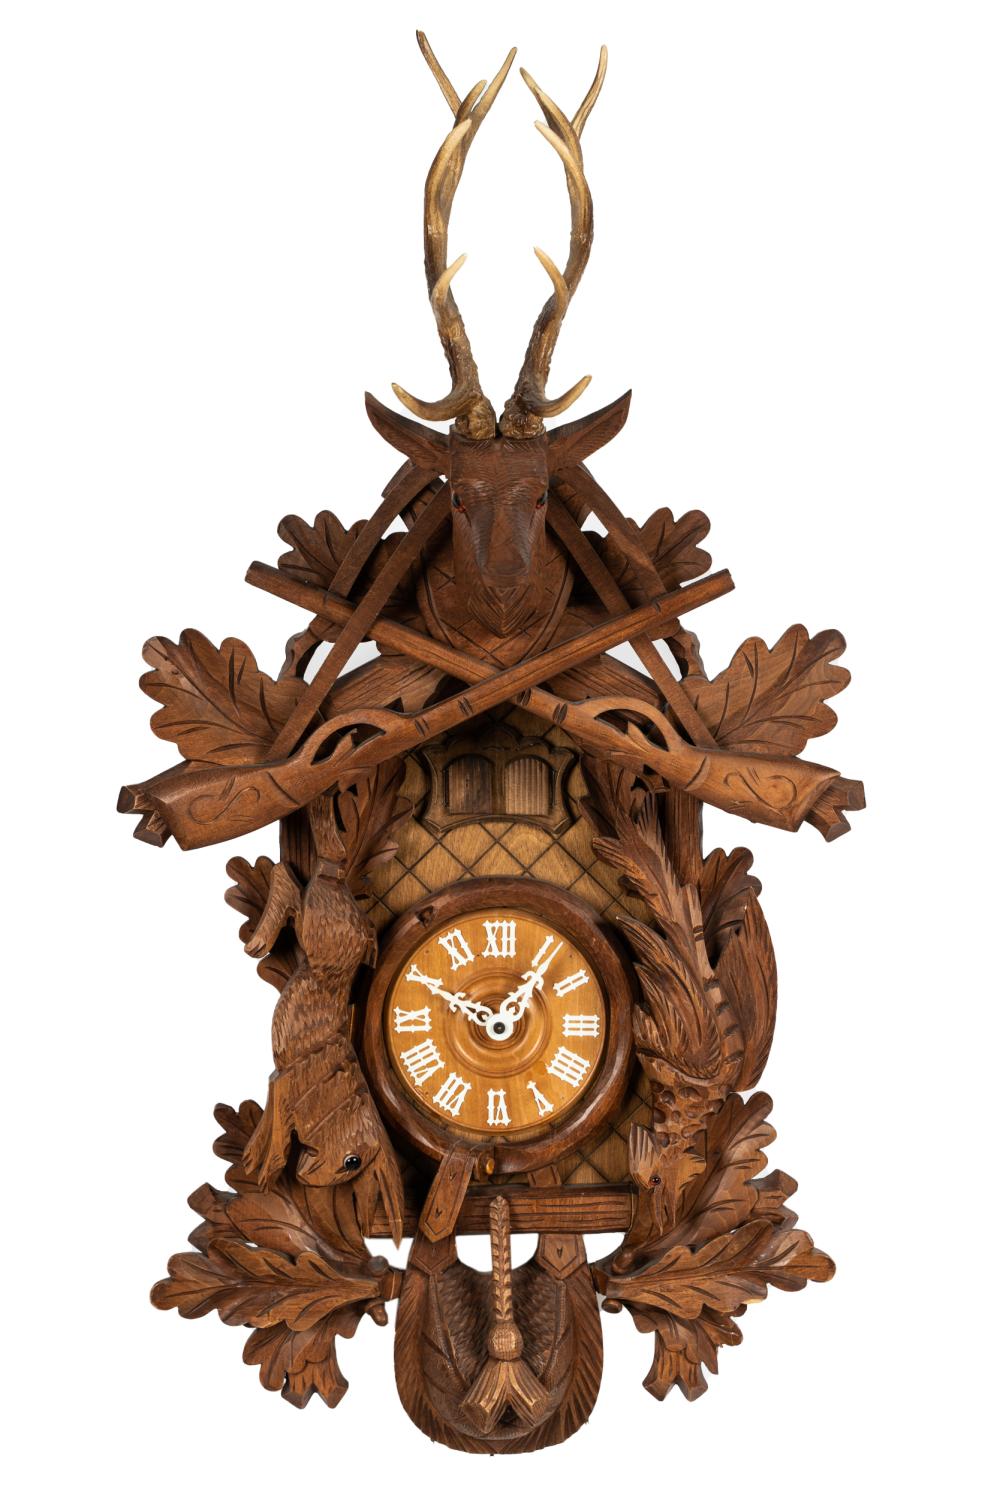 BLACK FOREST STYLE CUCKOO CLOCKwith